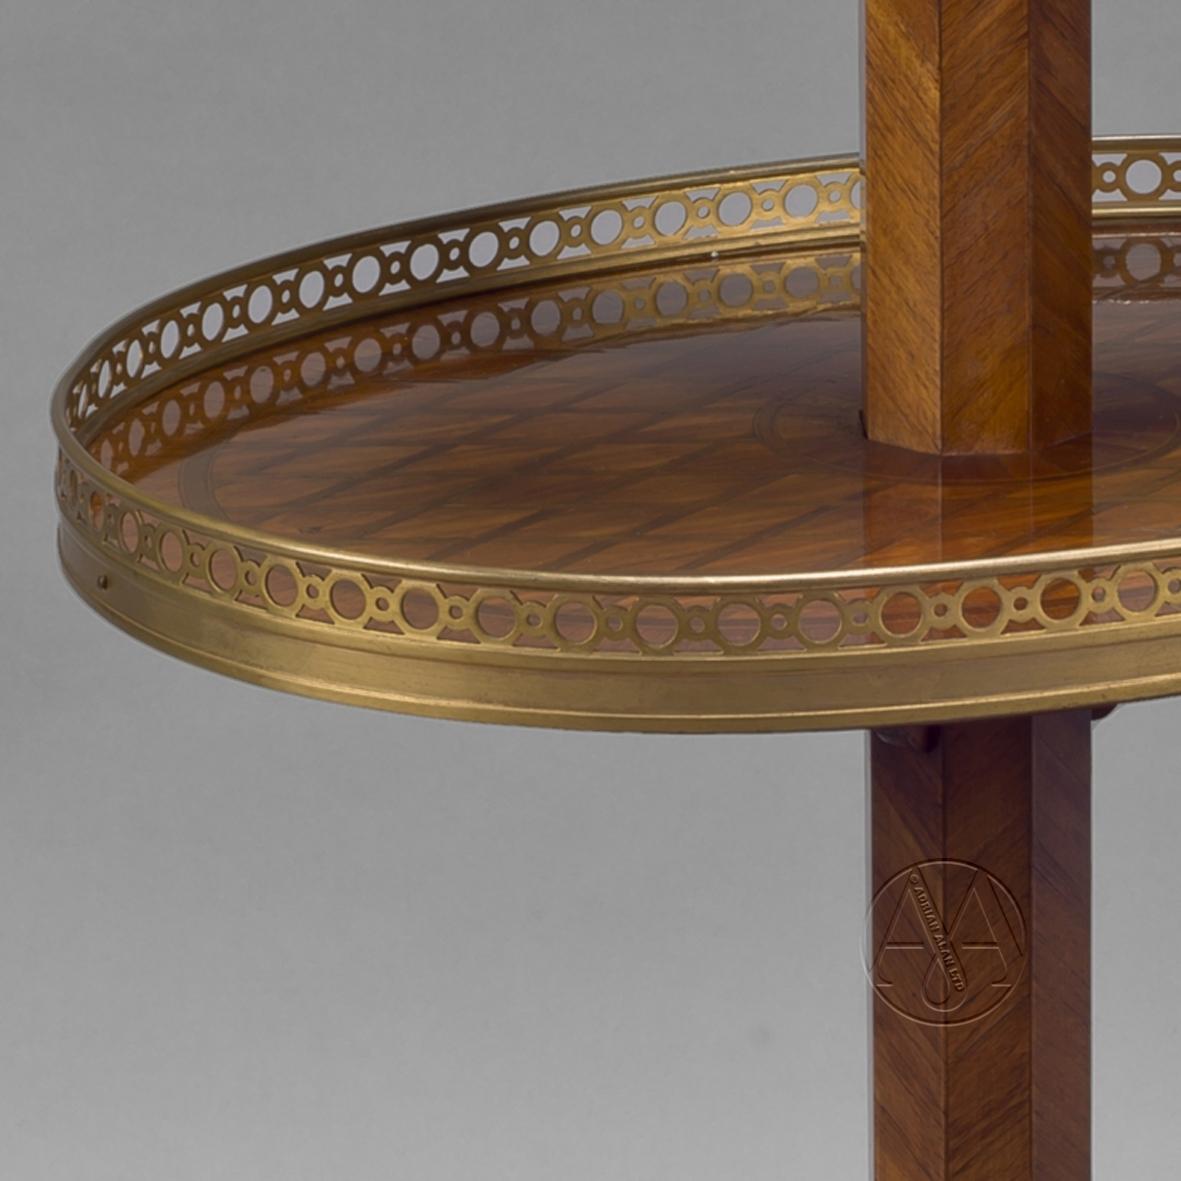 A Detail of A Fine Oval Three-Tier Gueridon